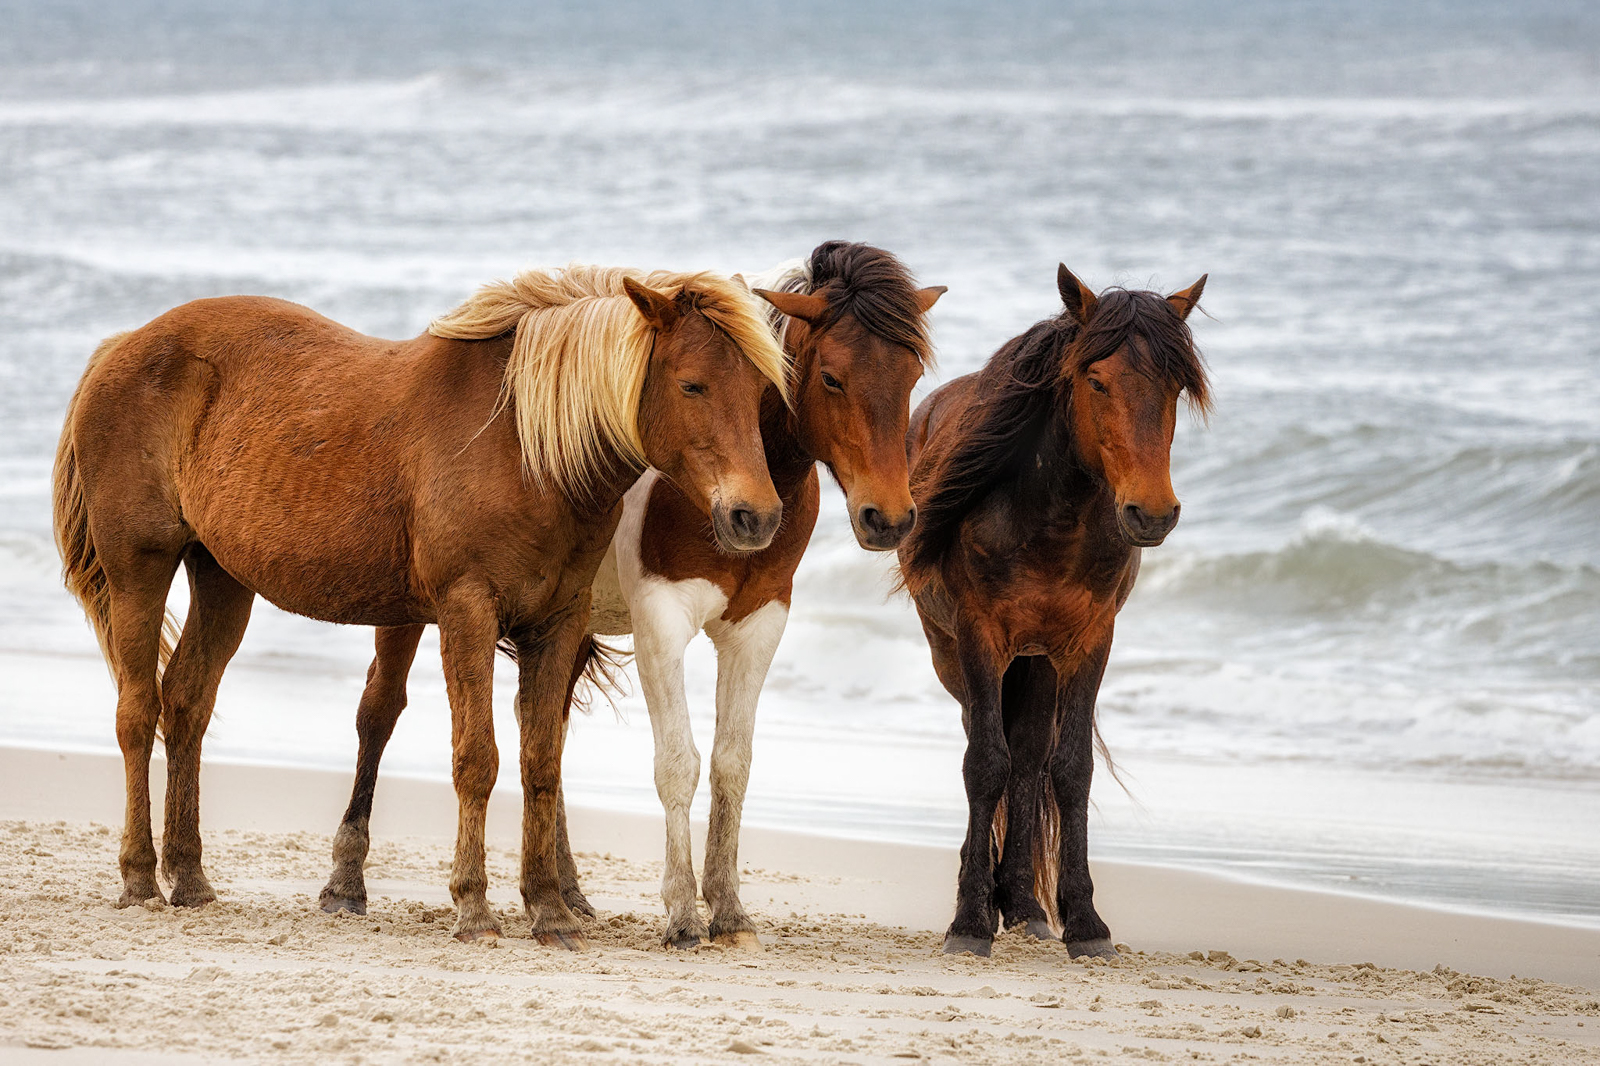 2021_05_Assateague-11968-Edit2048.jpg - A little later in the morning we came across another herd of horses on the beach, all standing with their faces into the wind.  They seemed to be enjoying the cool breeze coming off water.